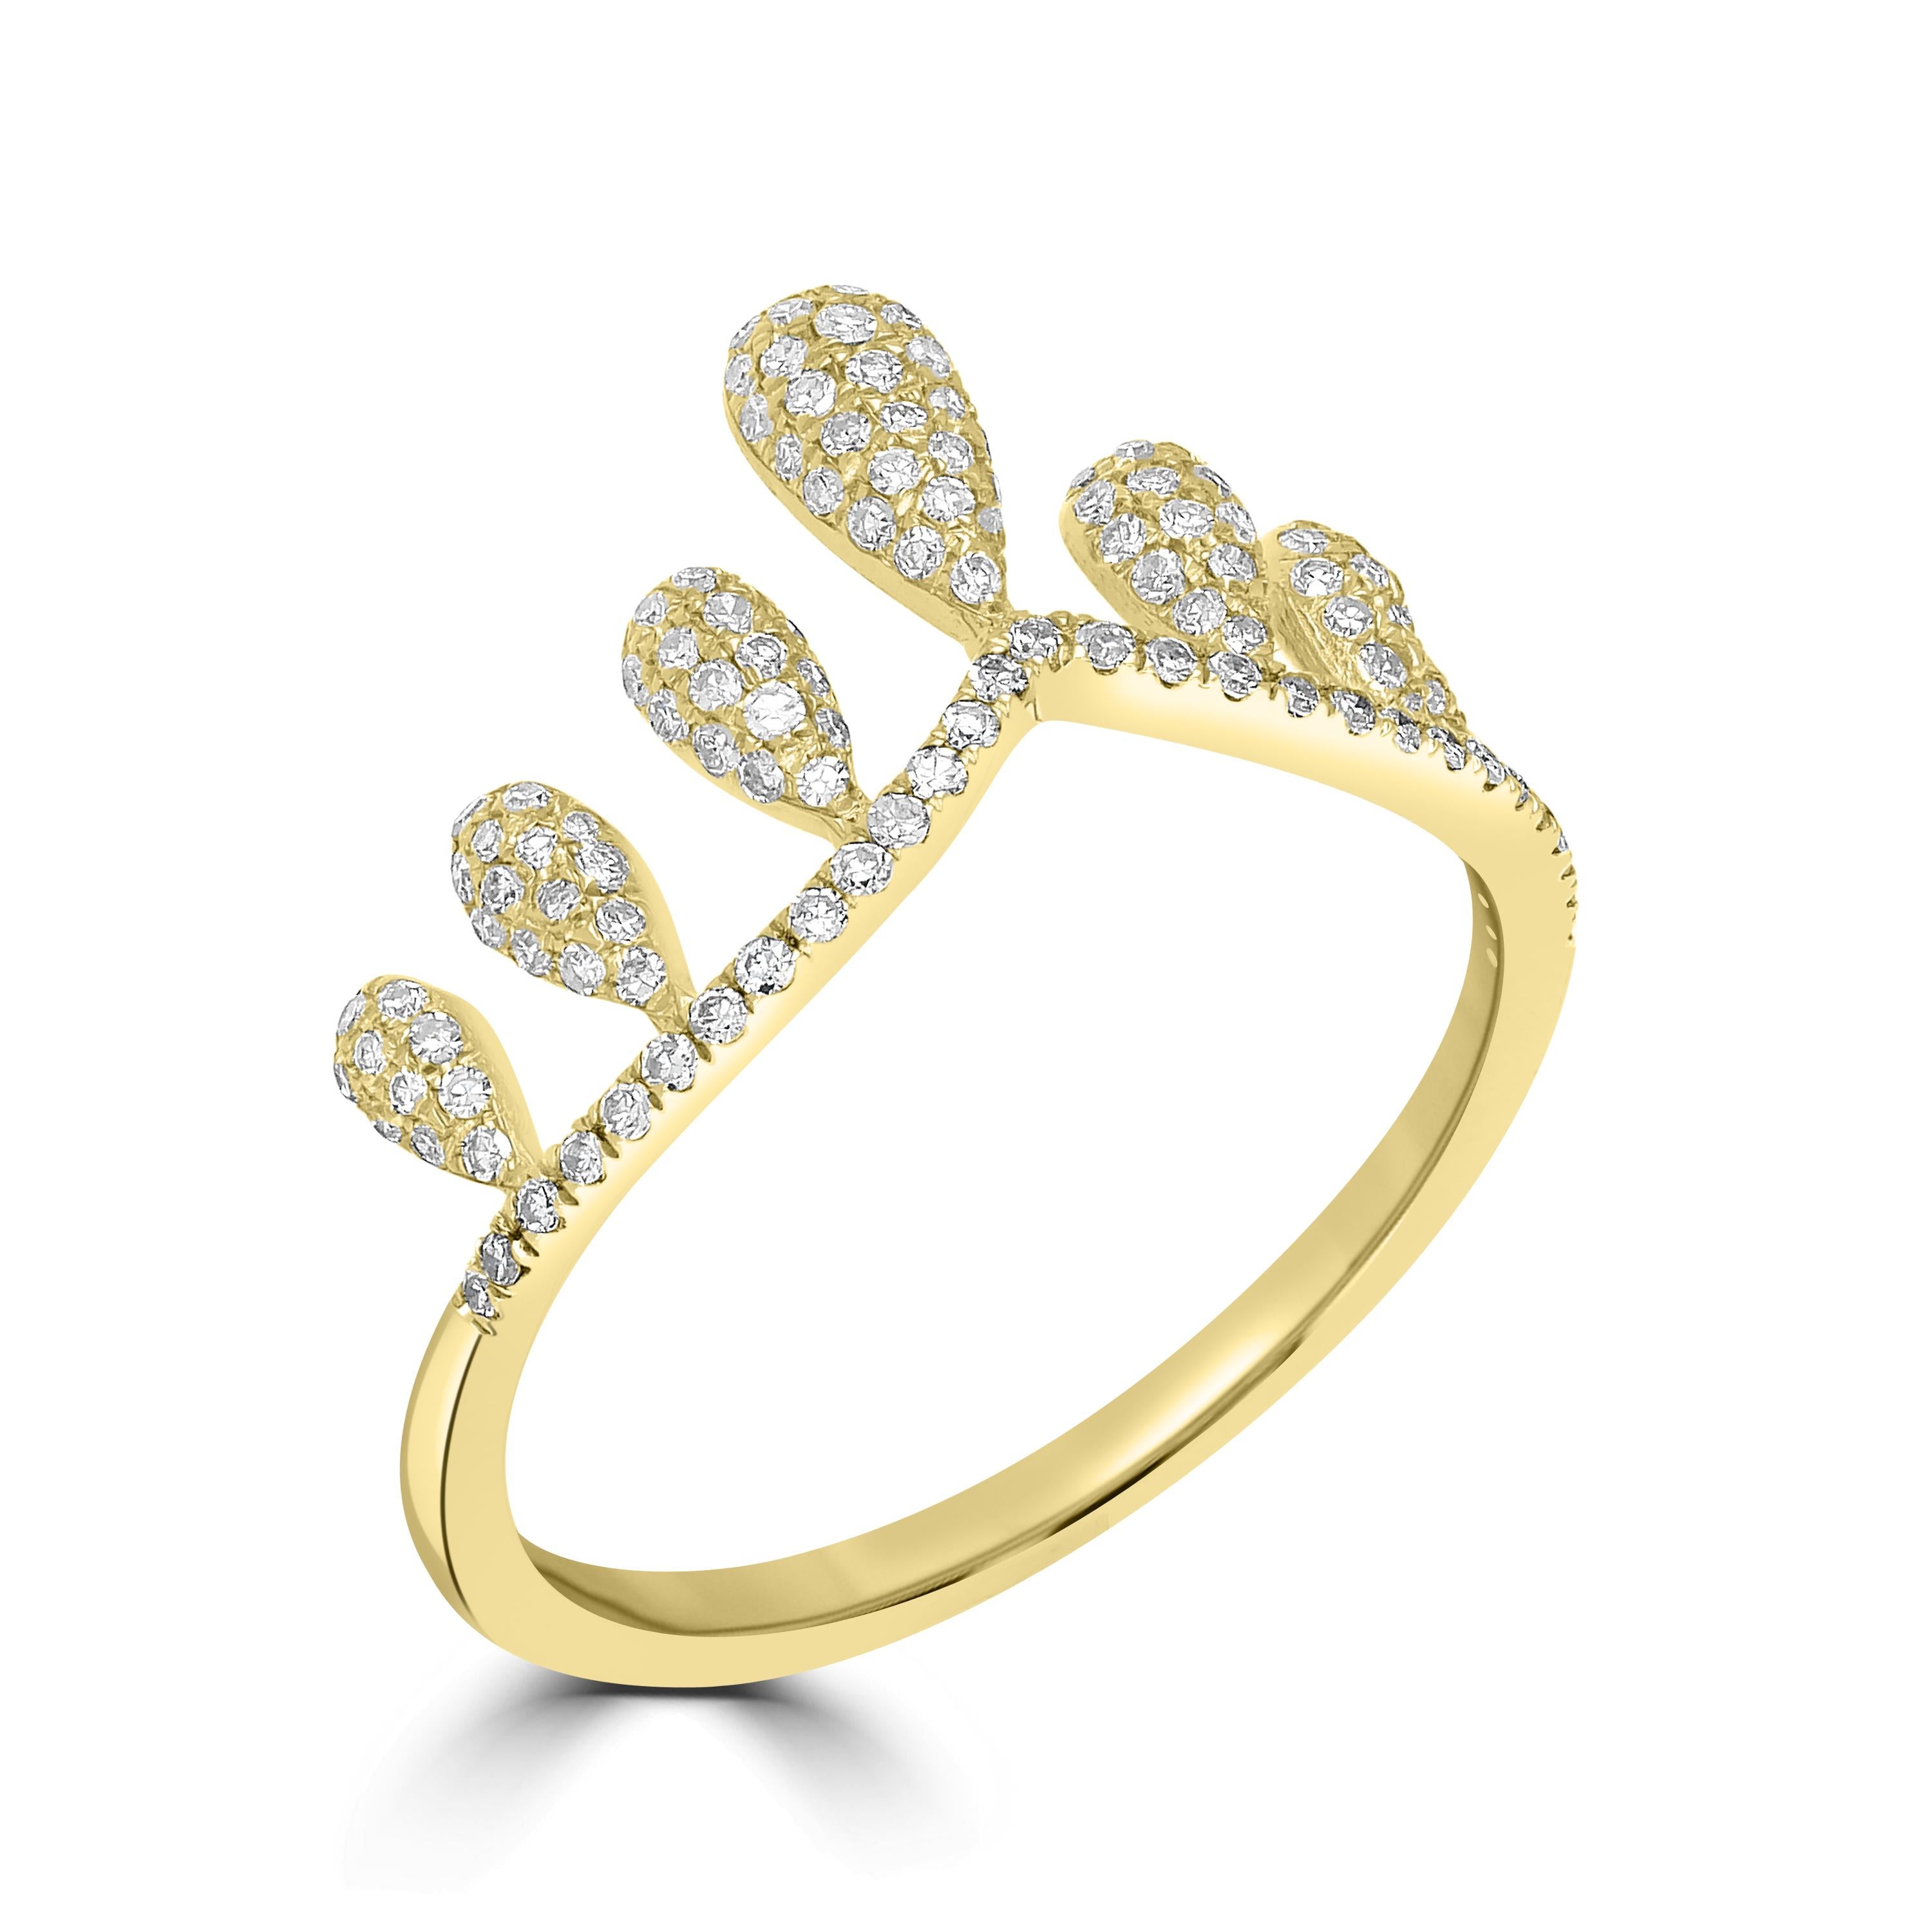 This stunning crown diamond ring is made in 14K Yellow Gold and is steeped in grace. This Luxle ring is set with 0.38 Cts round single-cut diamonds and is framed in a crown style to sparkle on your fingers. This ring's crown features exquisite